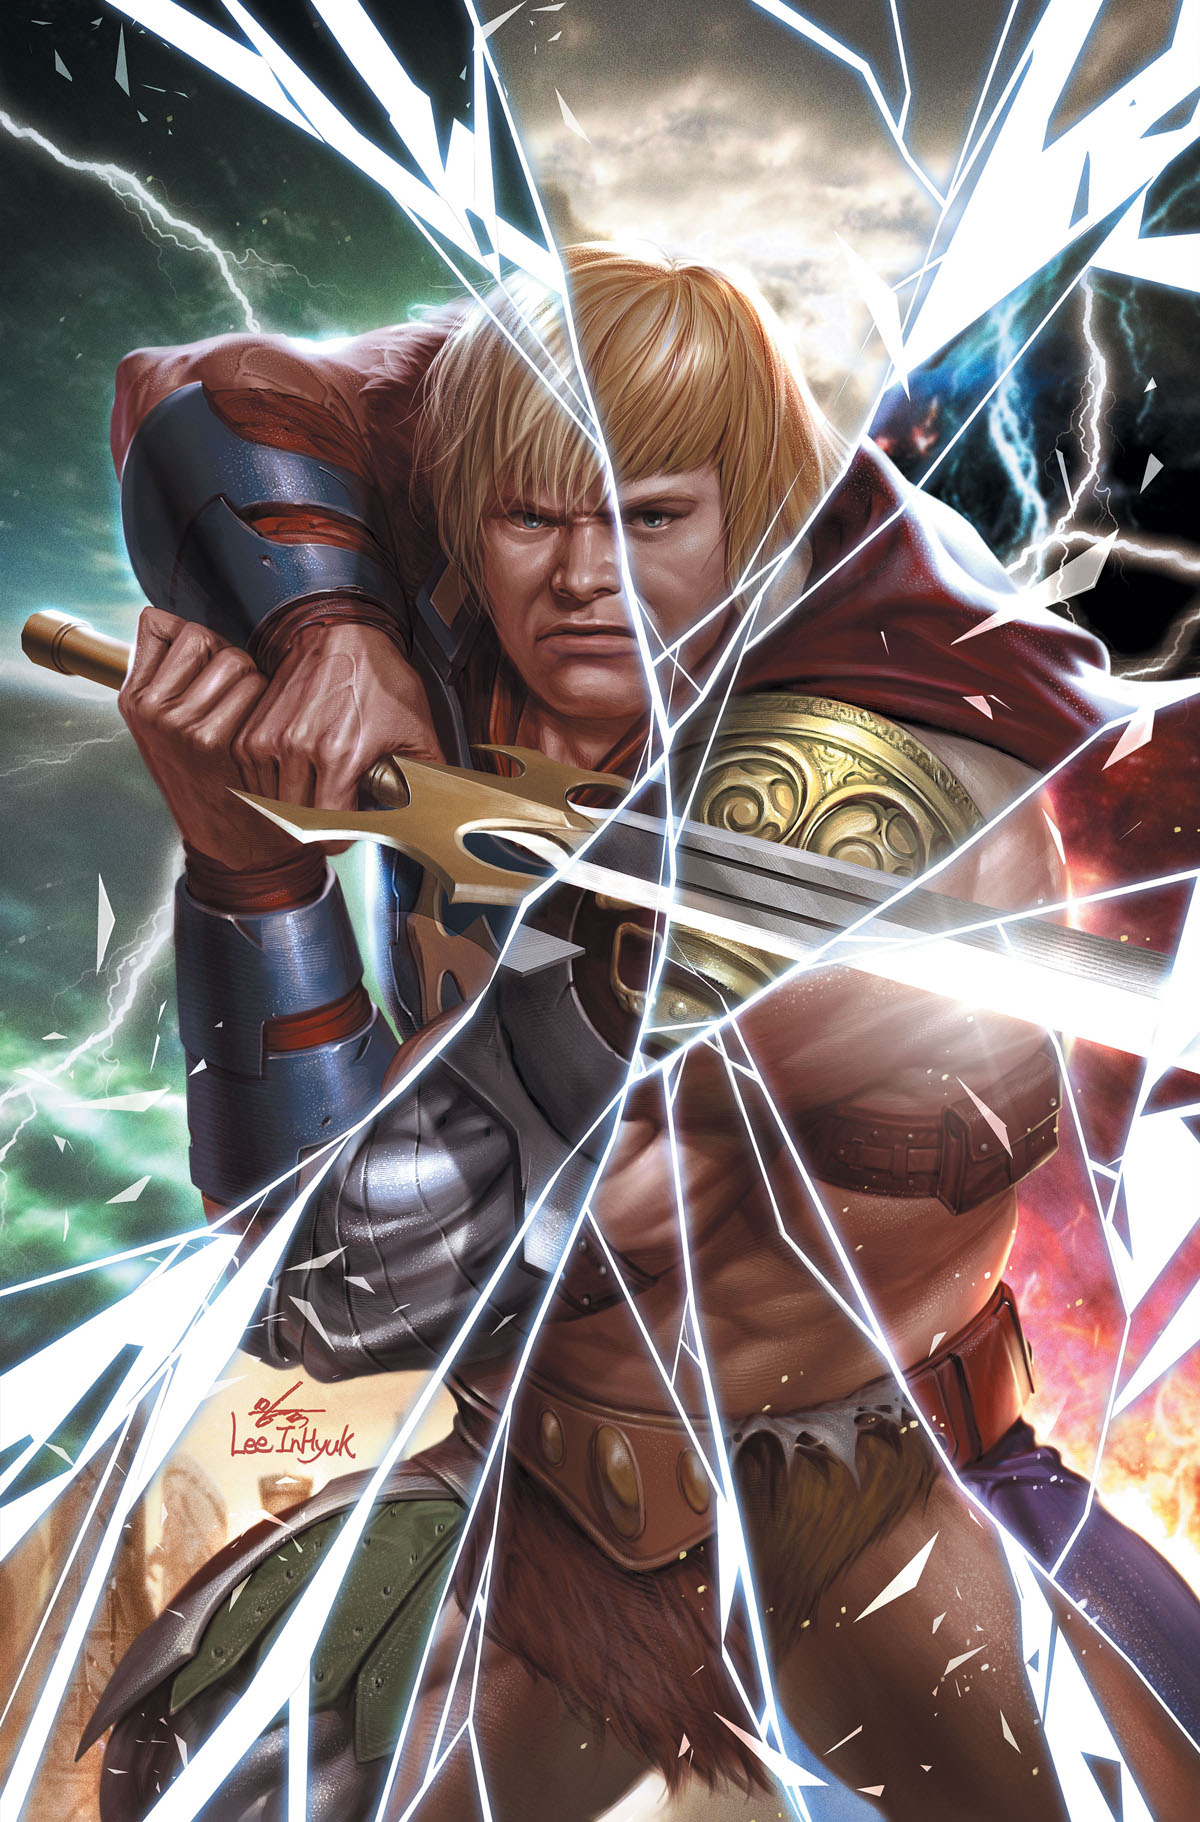 He-Man and the Masters of the Multiverse #1 cover